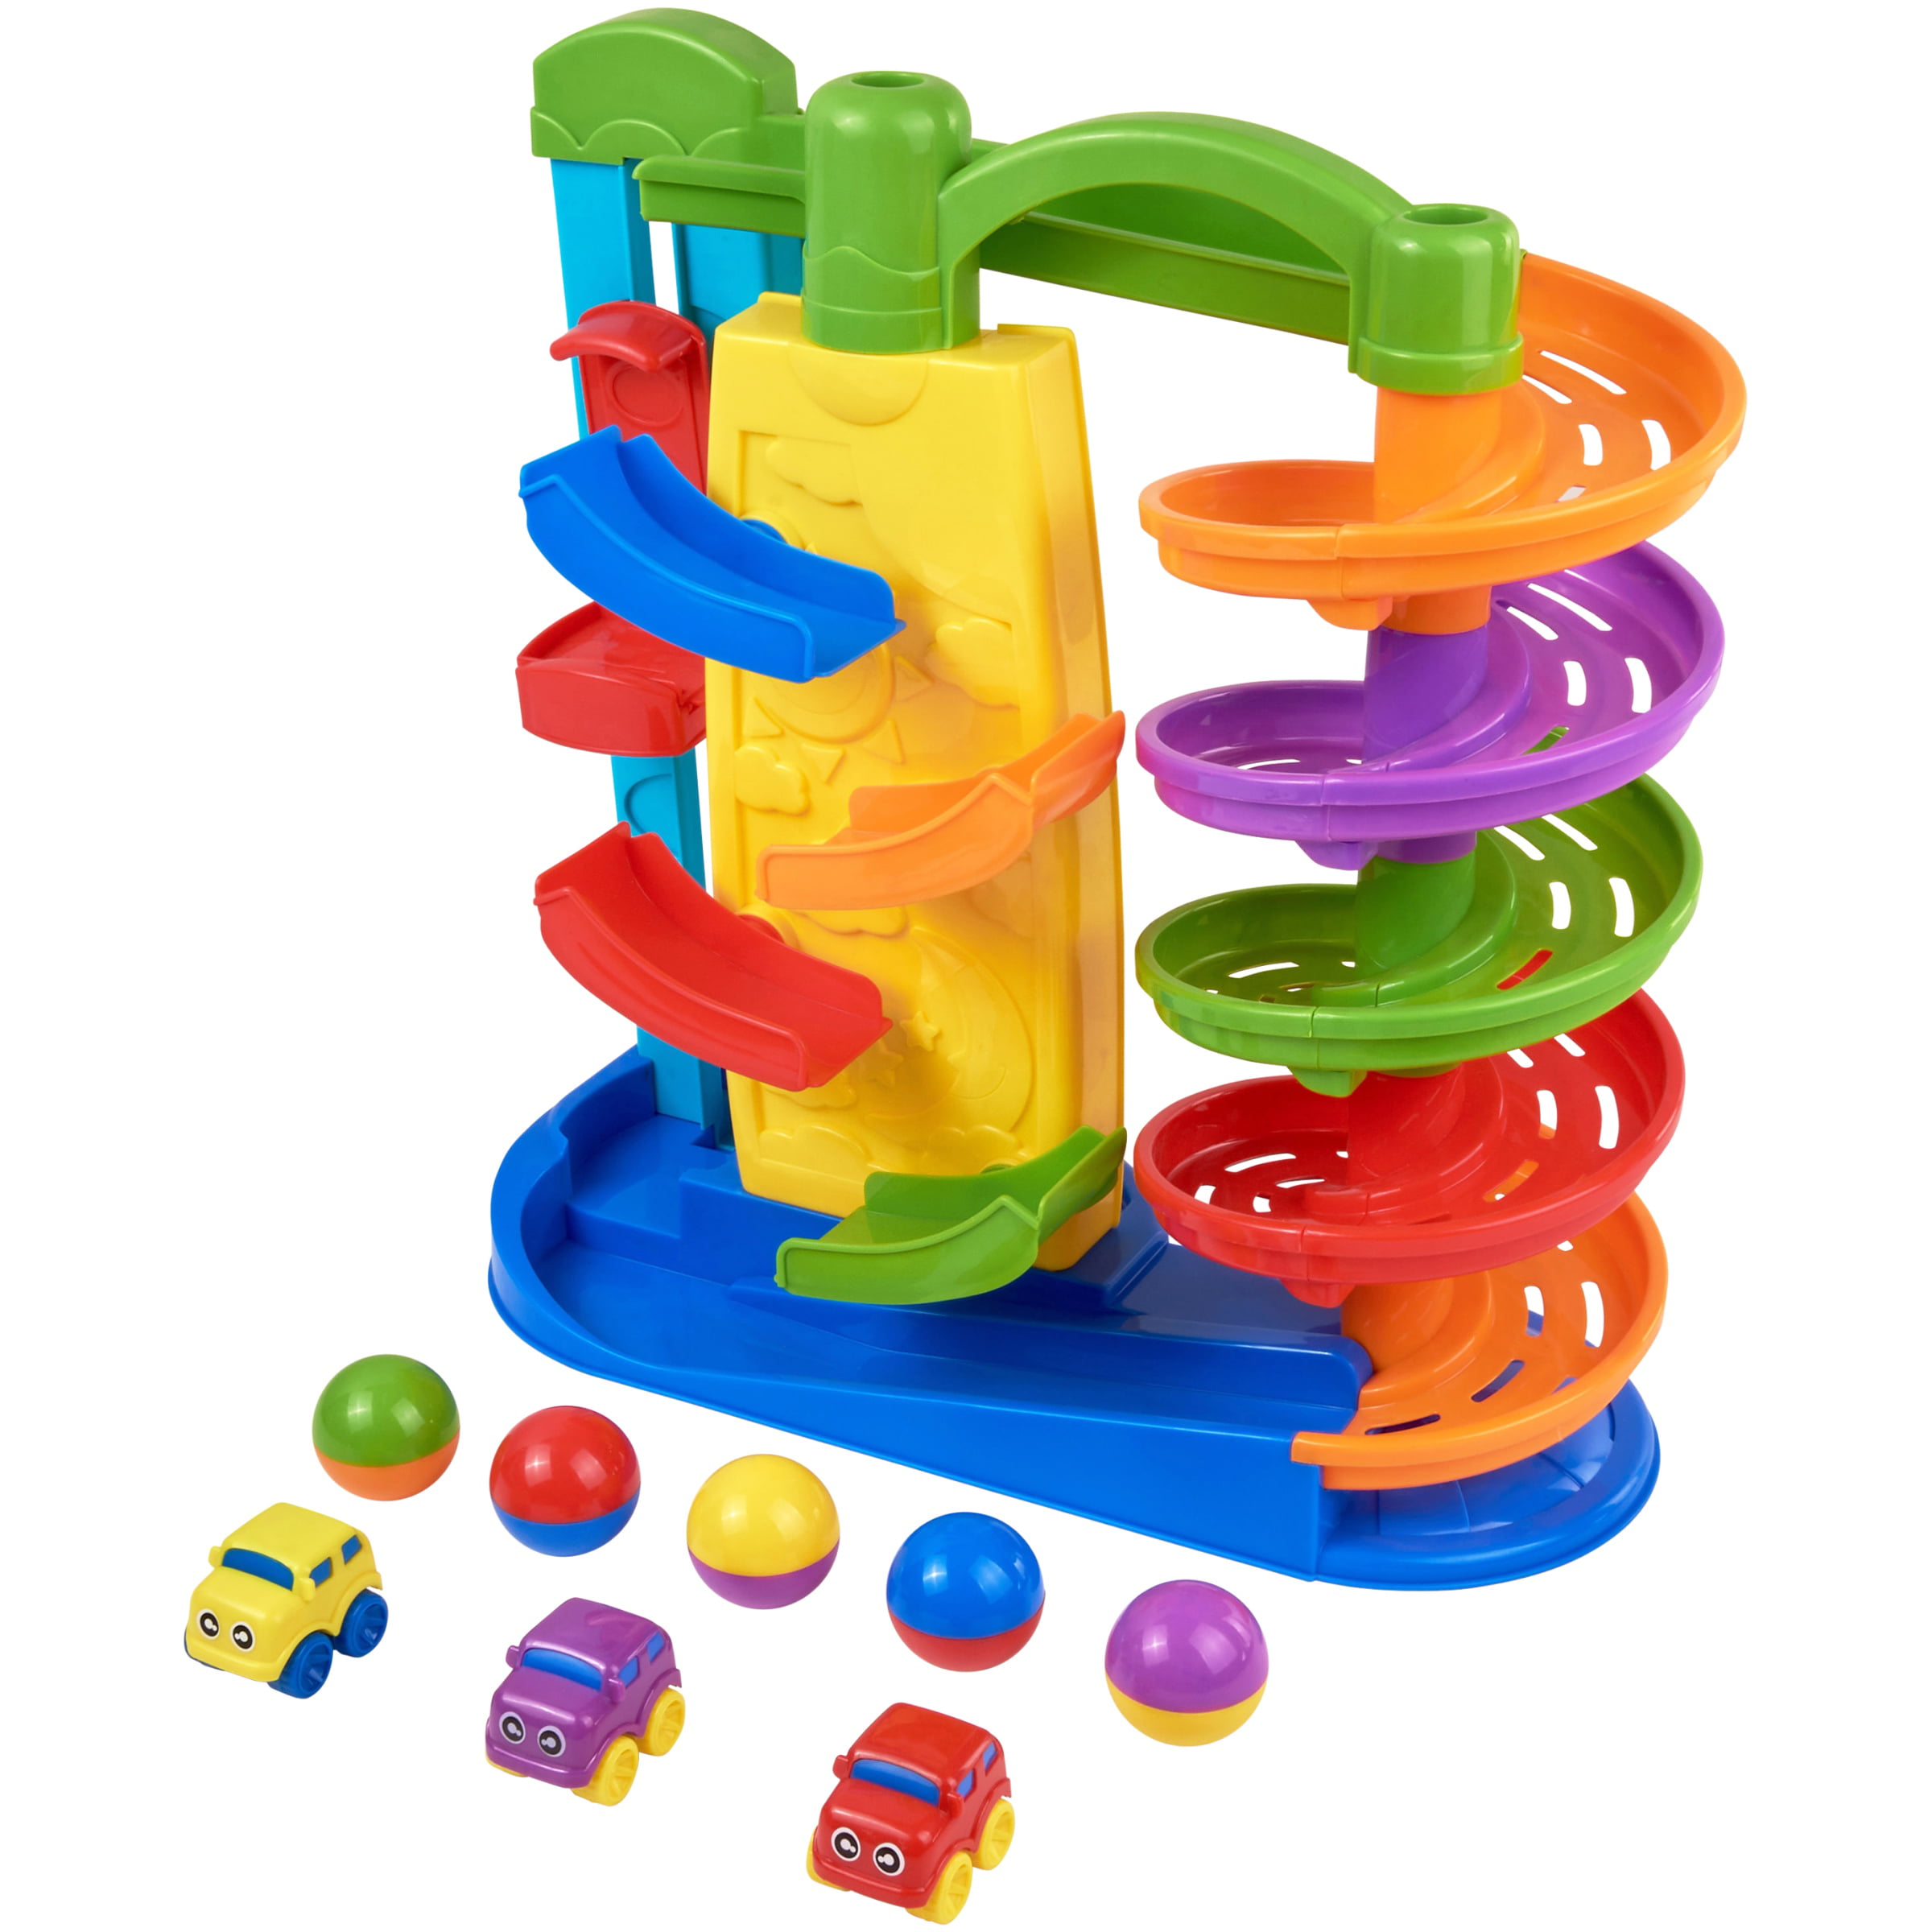 rolling toys for toddlers